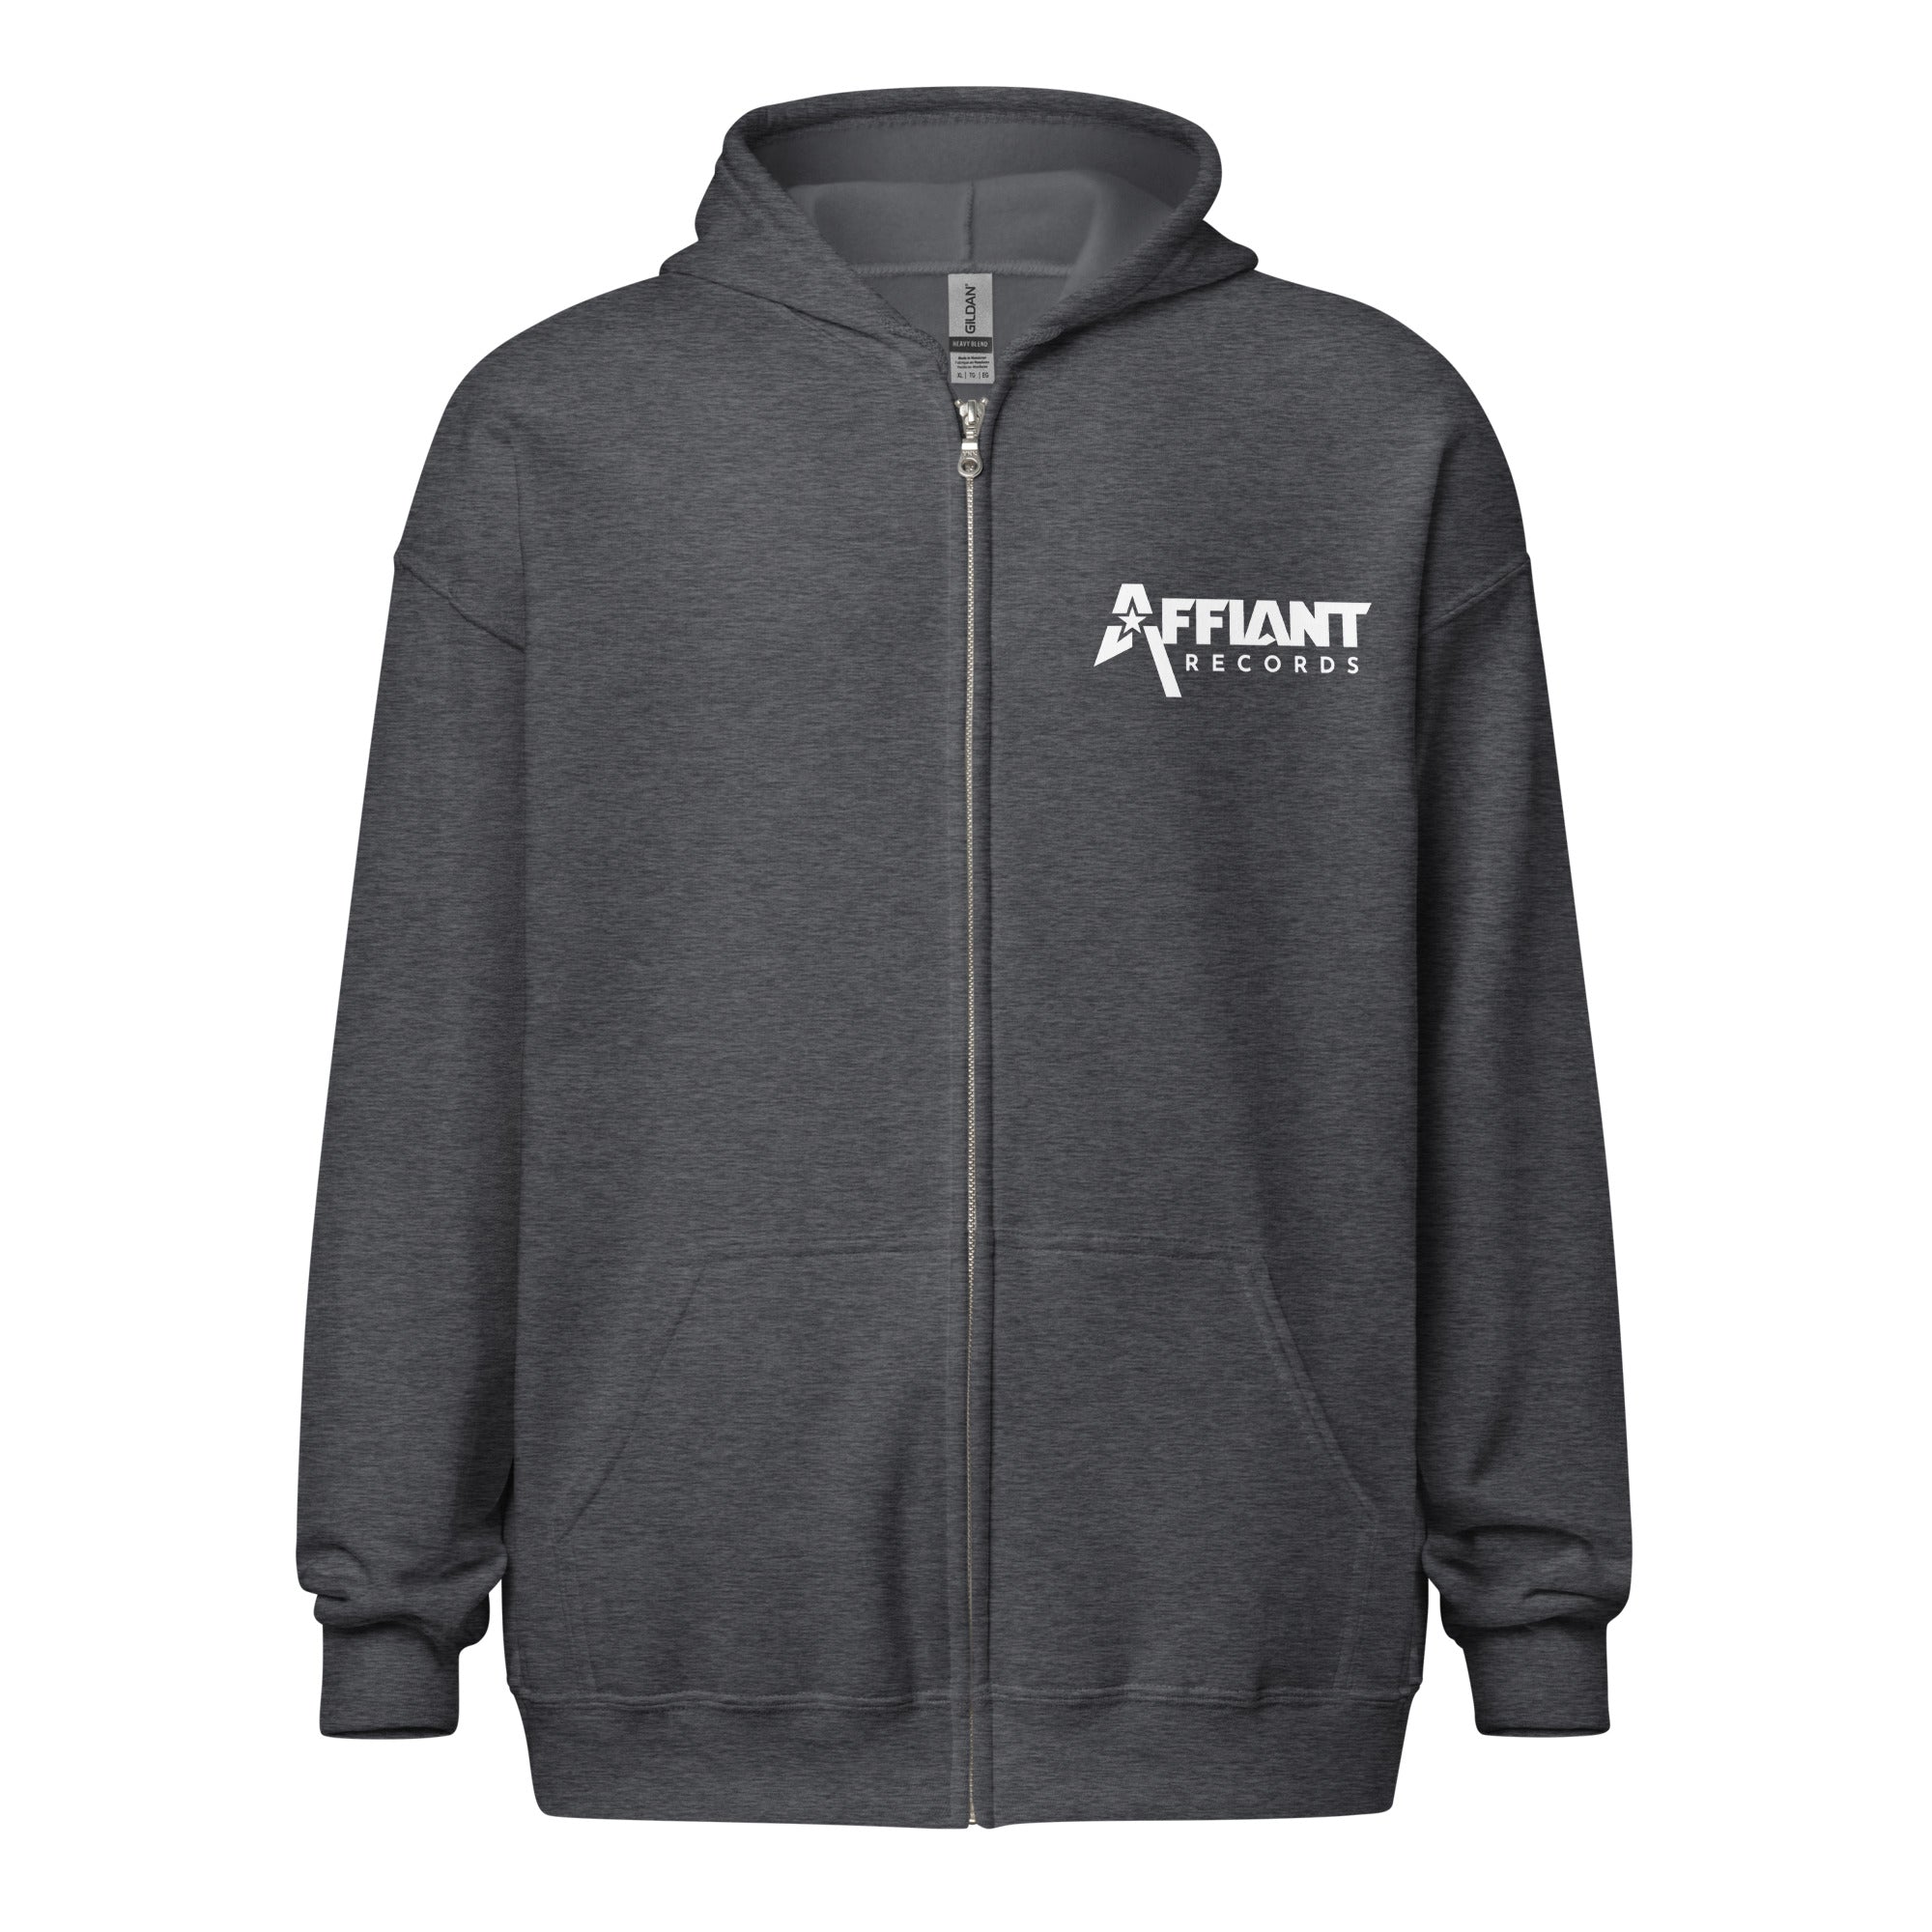 AFFIANT RECORDS - FULL LOGO ZIP UP HOODIE